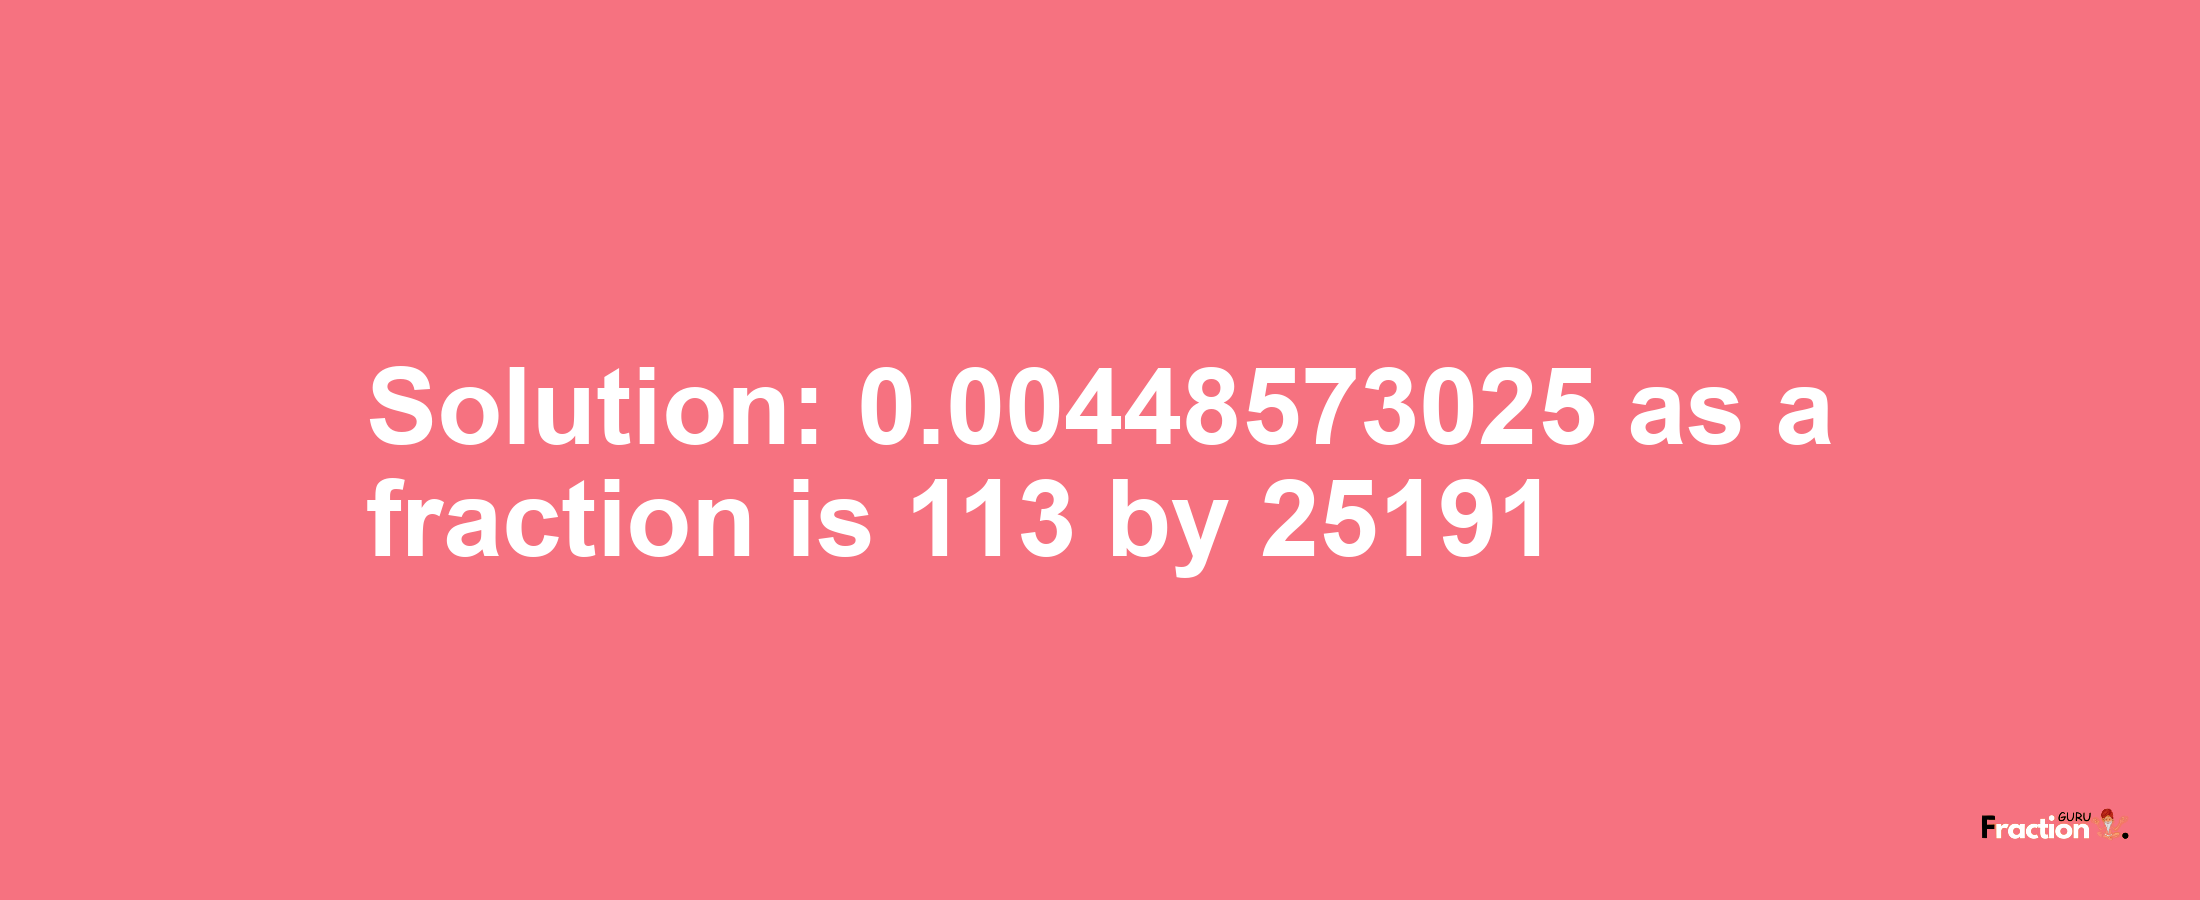 Solution:0.00448573025 as a fraction is 113/25191